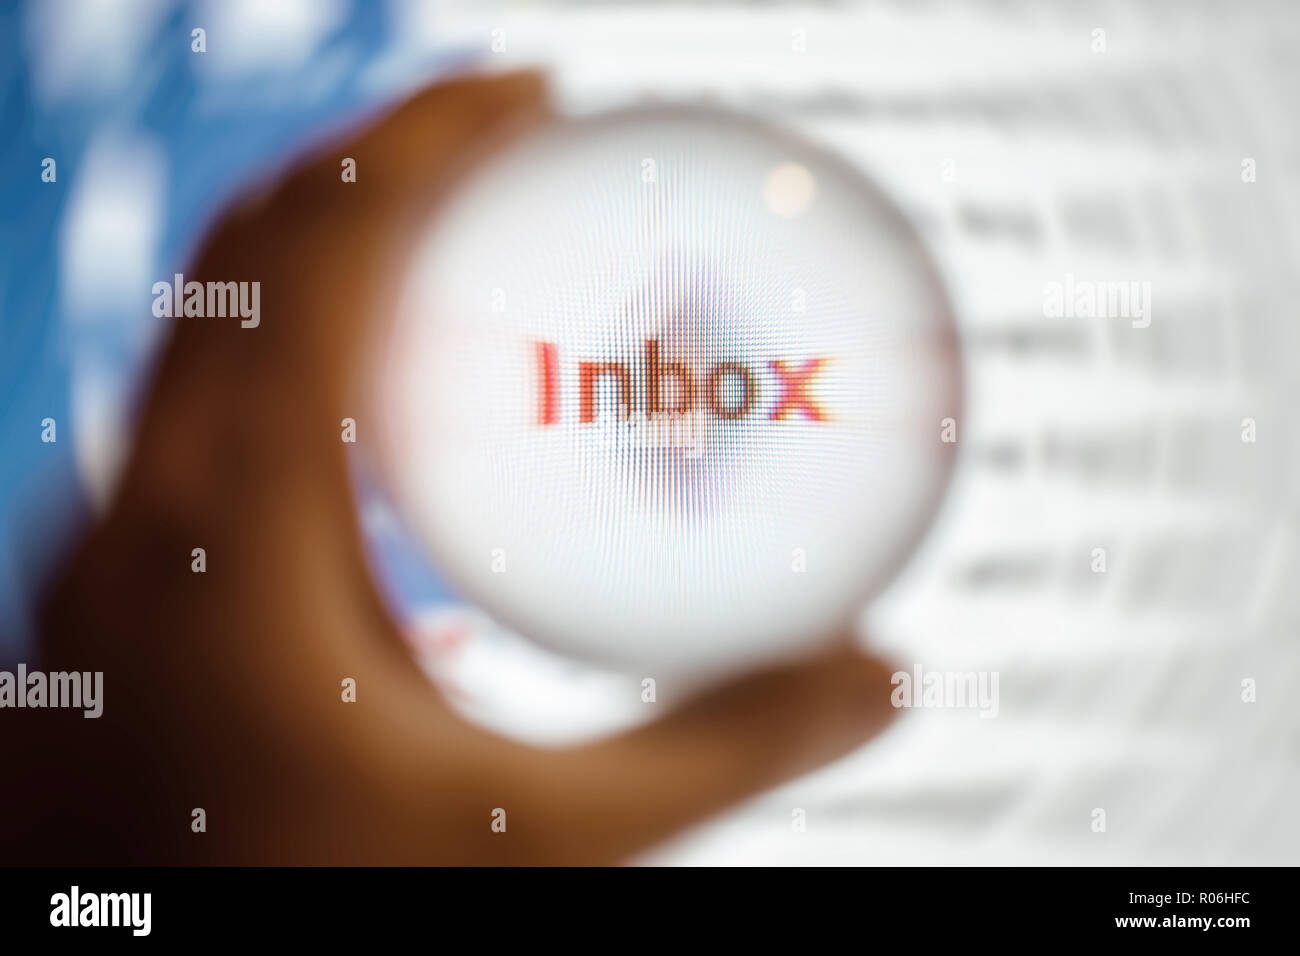 Crystal ball magnify screen word inbox, email concept. Stock Photo